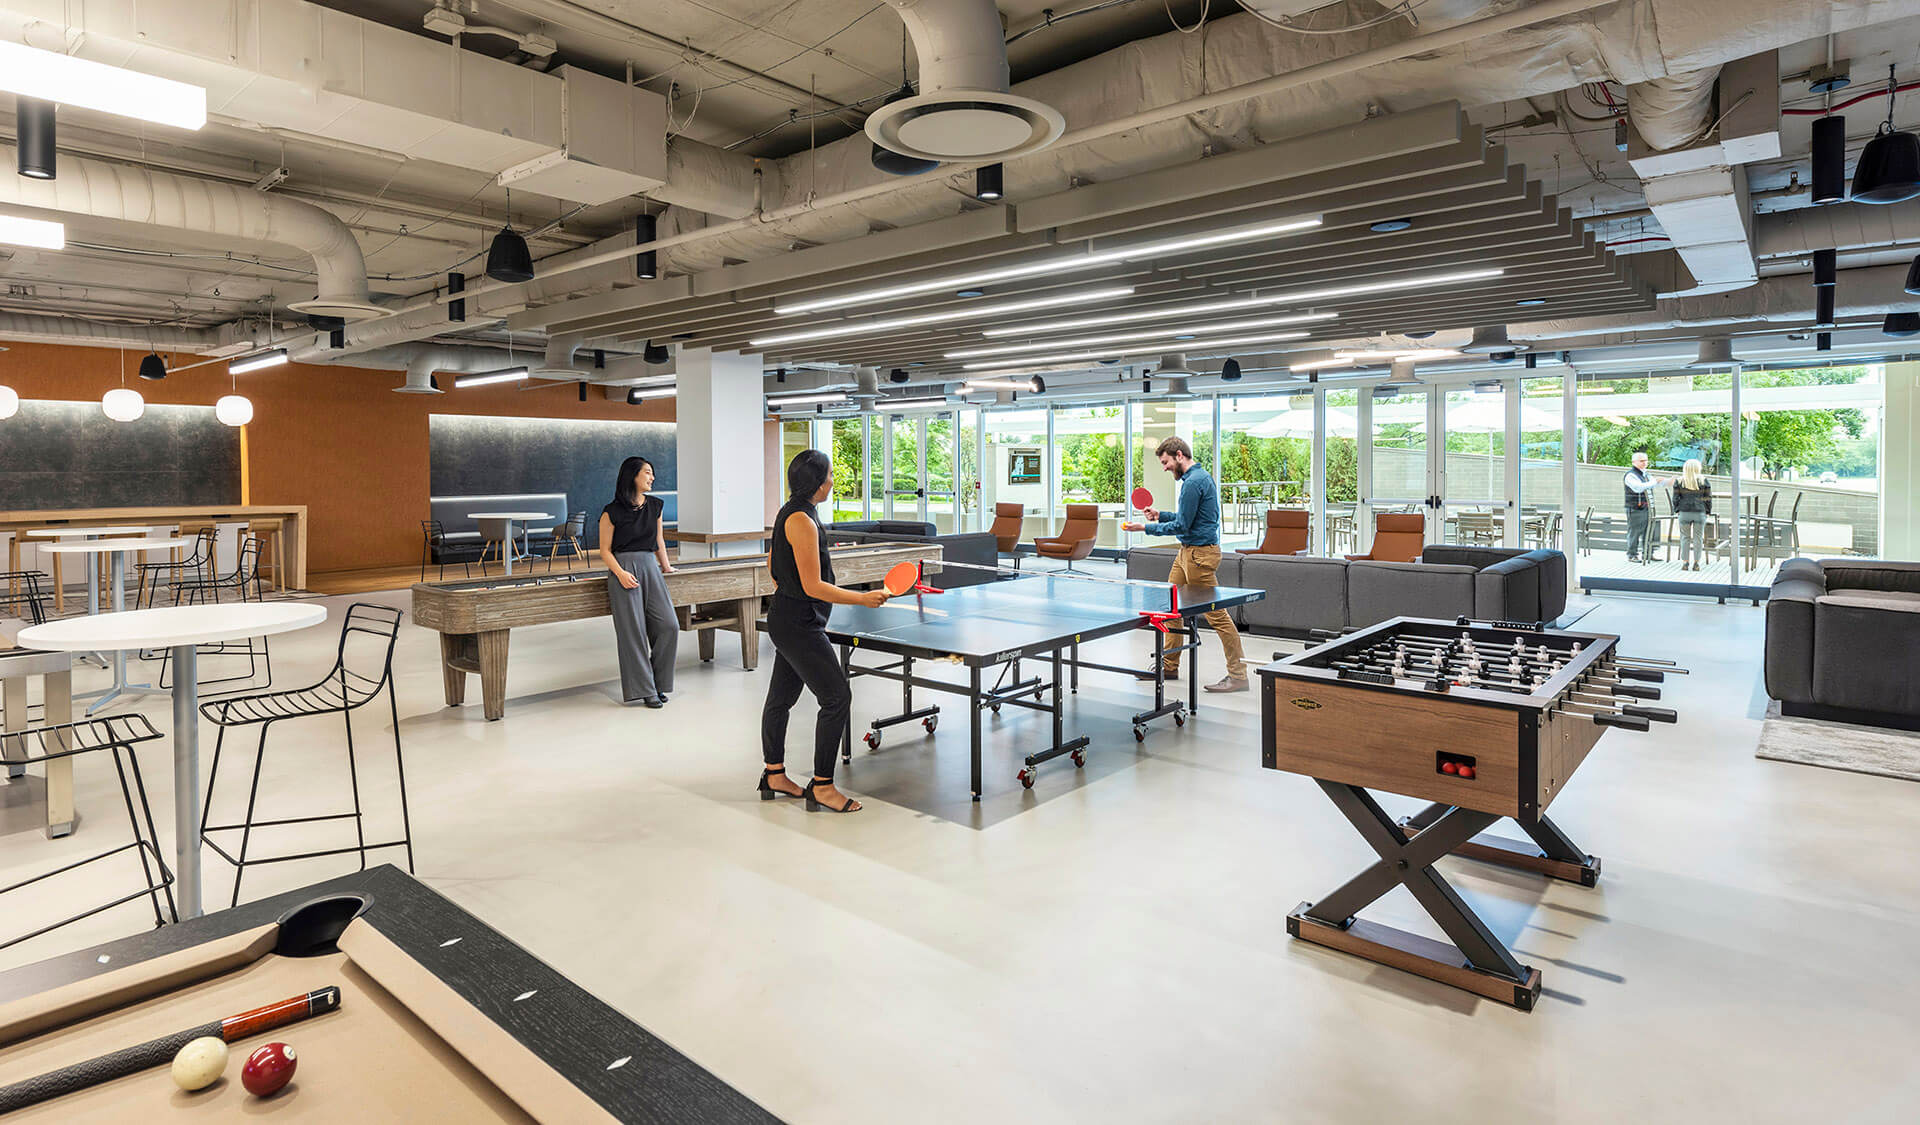 lounge area with foosball, shuffleboard, a pool table and people playing ping pong